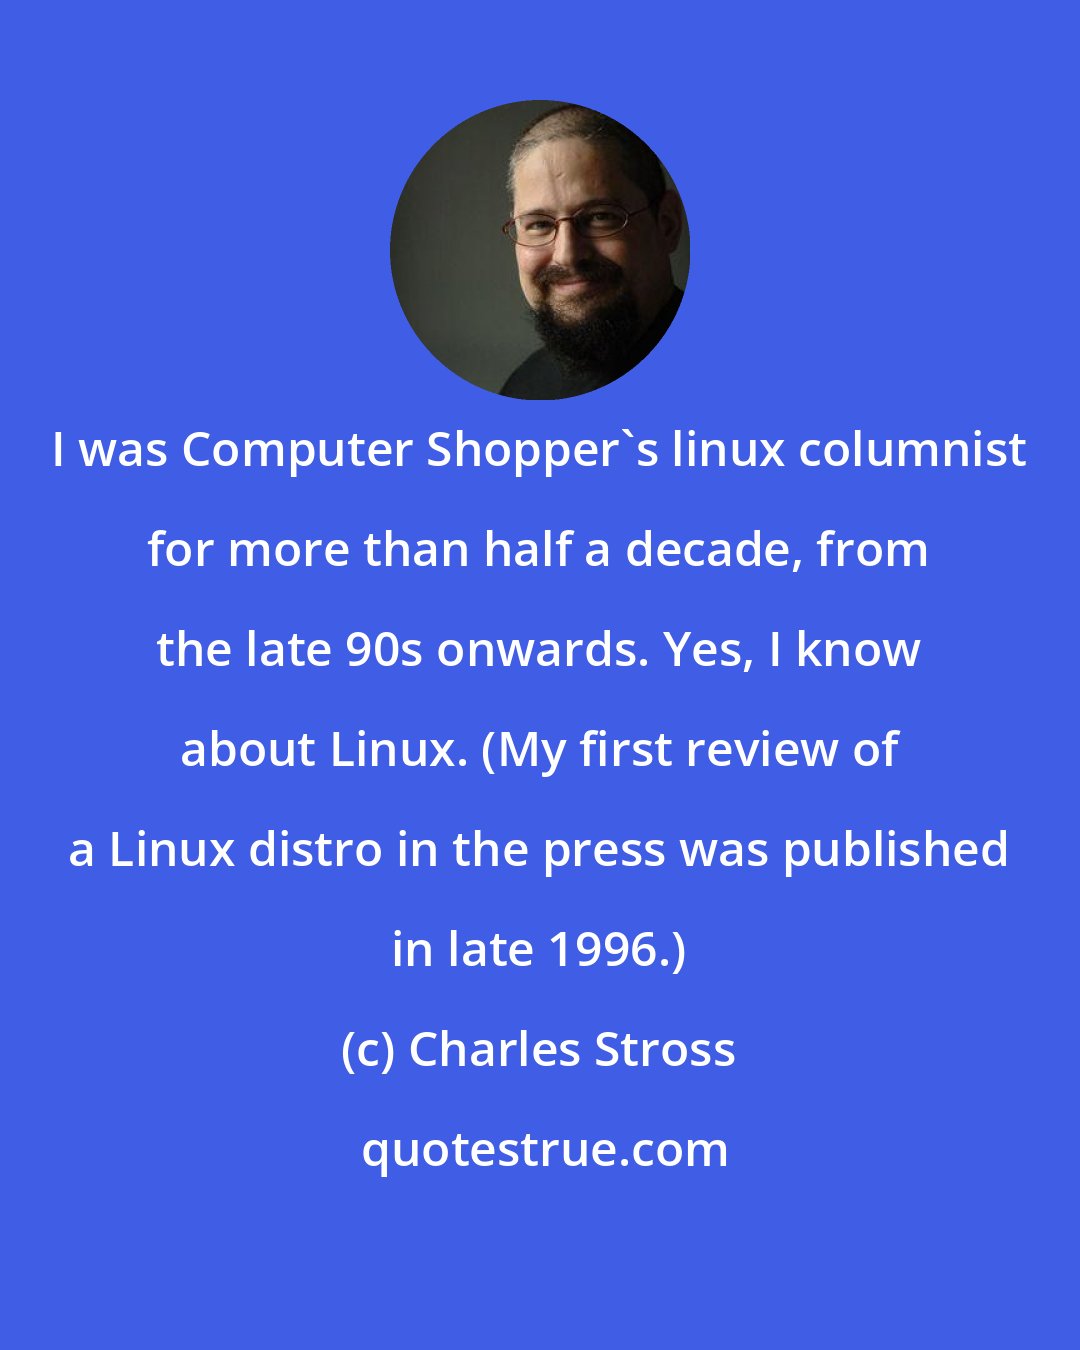 Charles Stross: I was Computer Shopper's linux columnist for more than half a decade, from the late 90s onwards. Yes, I know about Linux. (My first review of a Linux distro in the press was published in late 1996.)